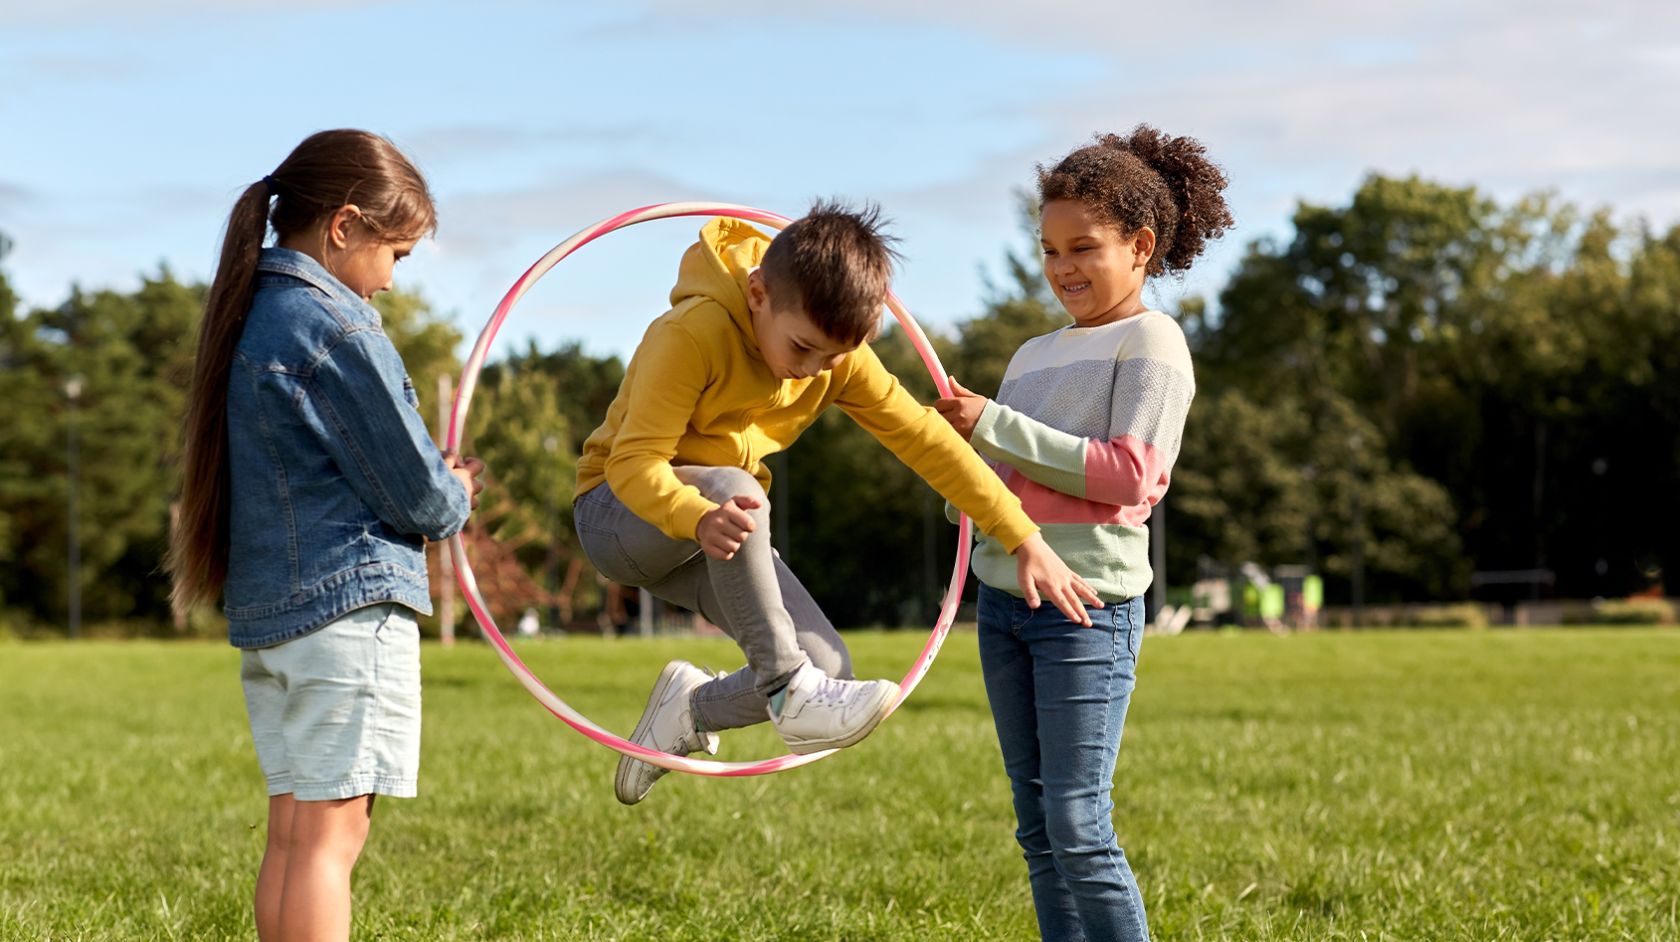 A Person And Two Children Playing With A Kite